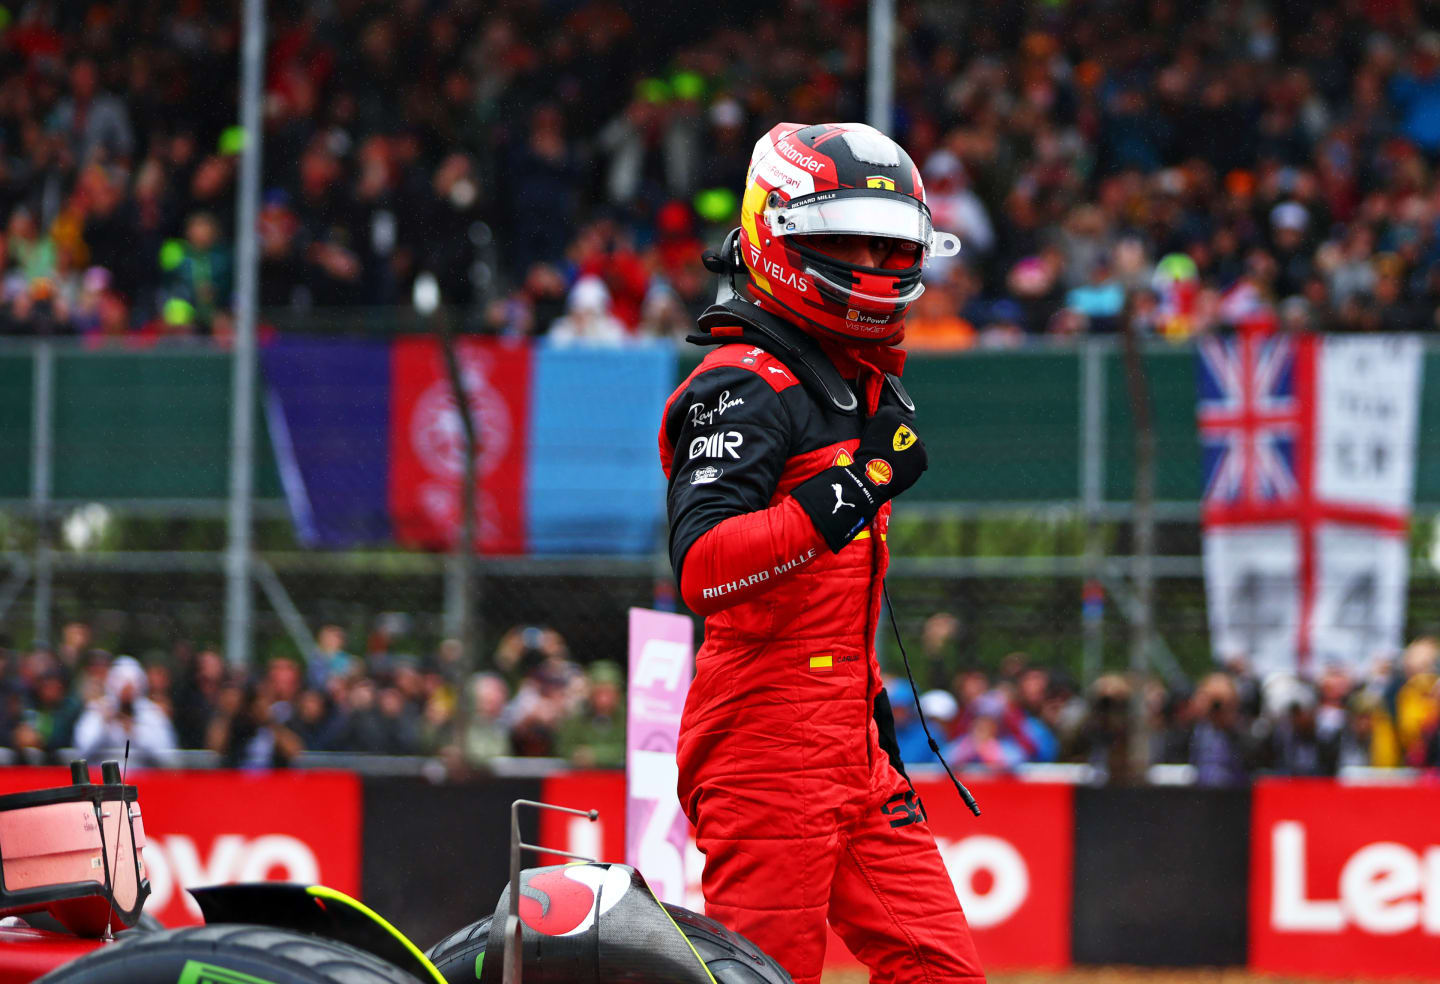 NORTHAMPTON, ENGLAND - JULY 02: Pole position qualifier Carlos Sainz of Spain and Ferrari celebrates in parc ferme during qualifying ahead of the F1 Grand Prix of Great Britain at Silverstone on July 02, 2022 in Northampton, England. (Photo by Mark Thompson/Getty Images)